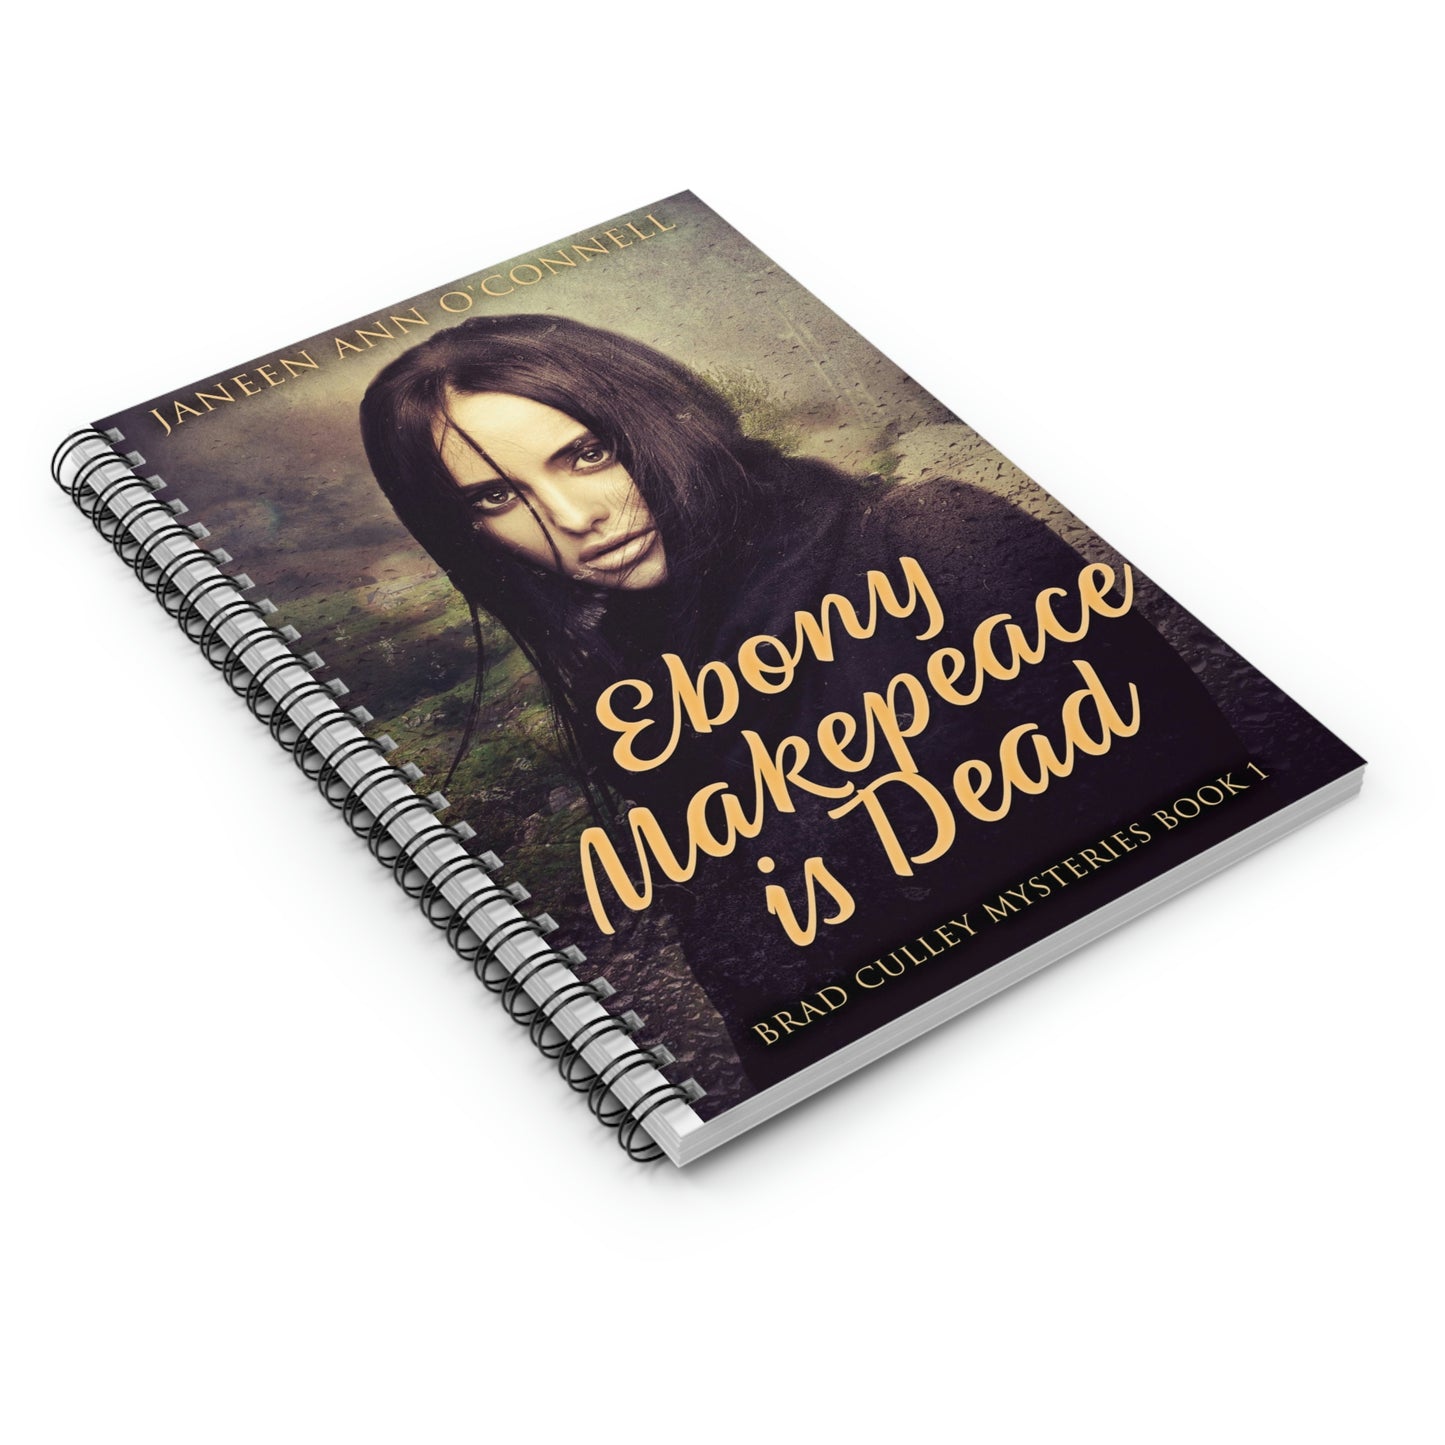 Ebony Makepeace is Dead - Spiral Notebook